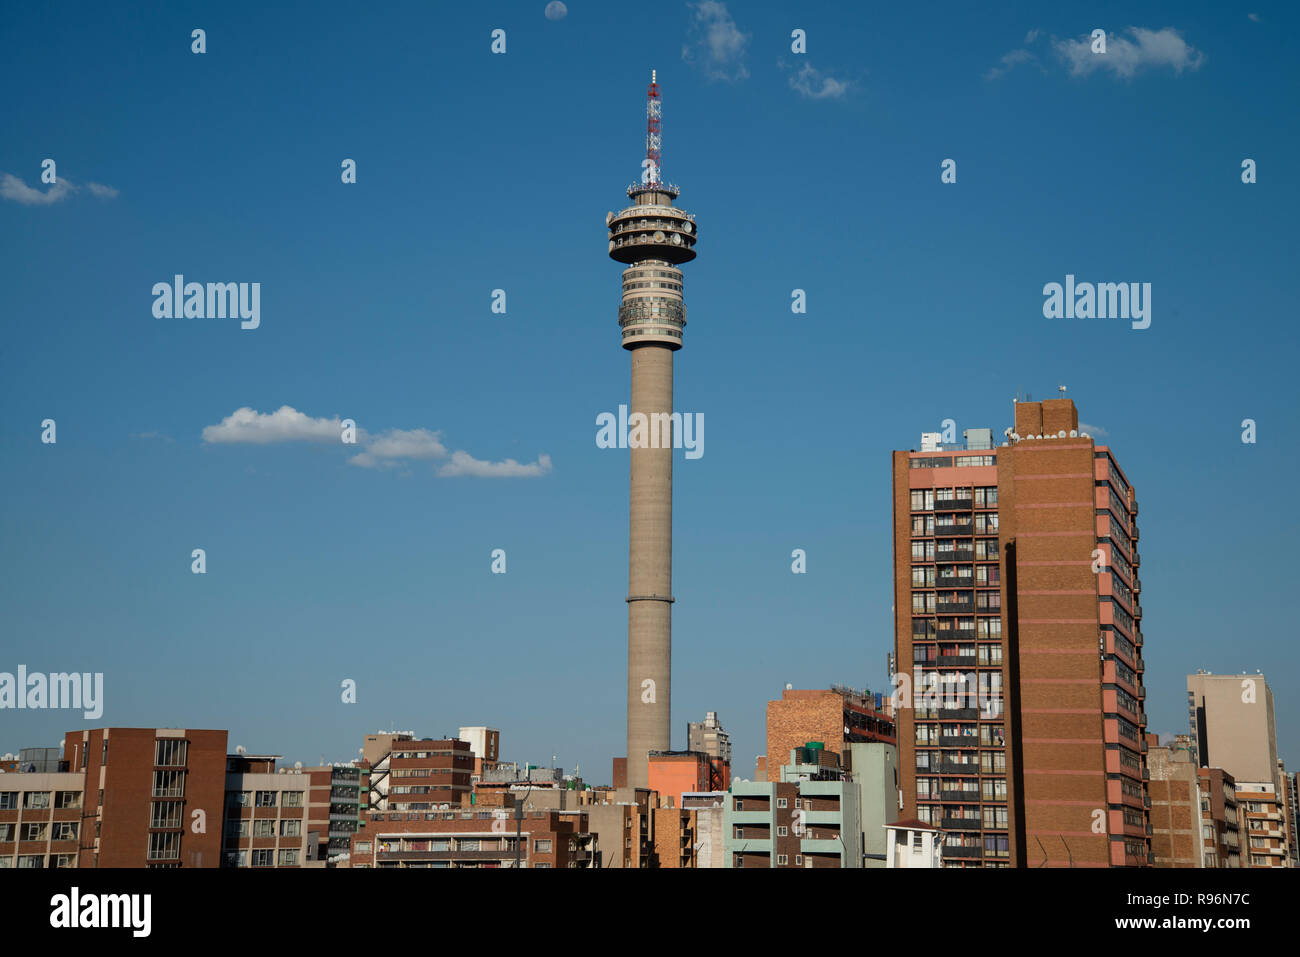 Johannesburg, South Africa, 19 December, 2018. View of Hillbrow from the Old Fort on Constitution Hill. The Old Fort, a prison since the 1800s, was also used a military garrison during the Anglo-Boer War. Today, the Fort is a museum. Credit: Eva-Lotta Jansson/Alamy Live News Stock Photo